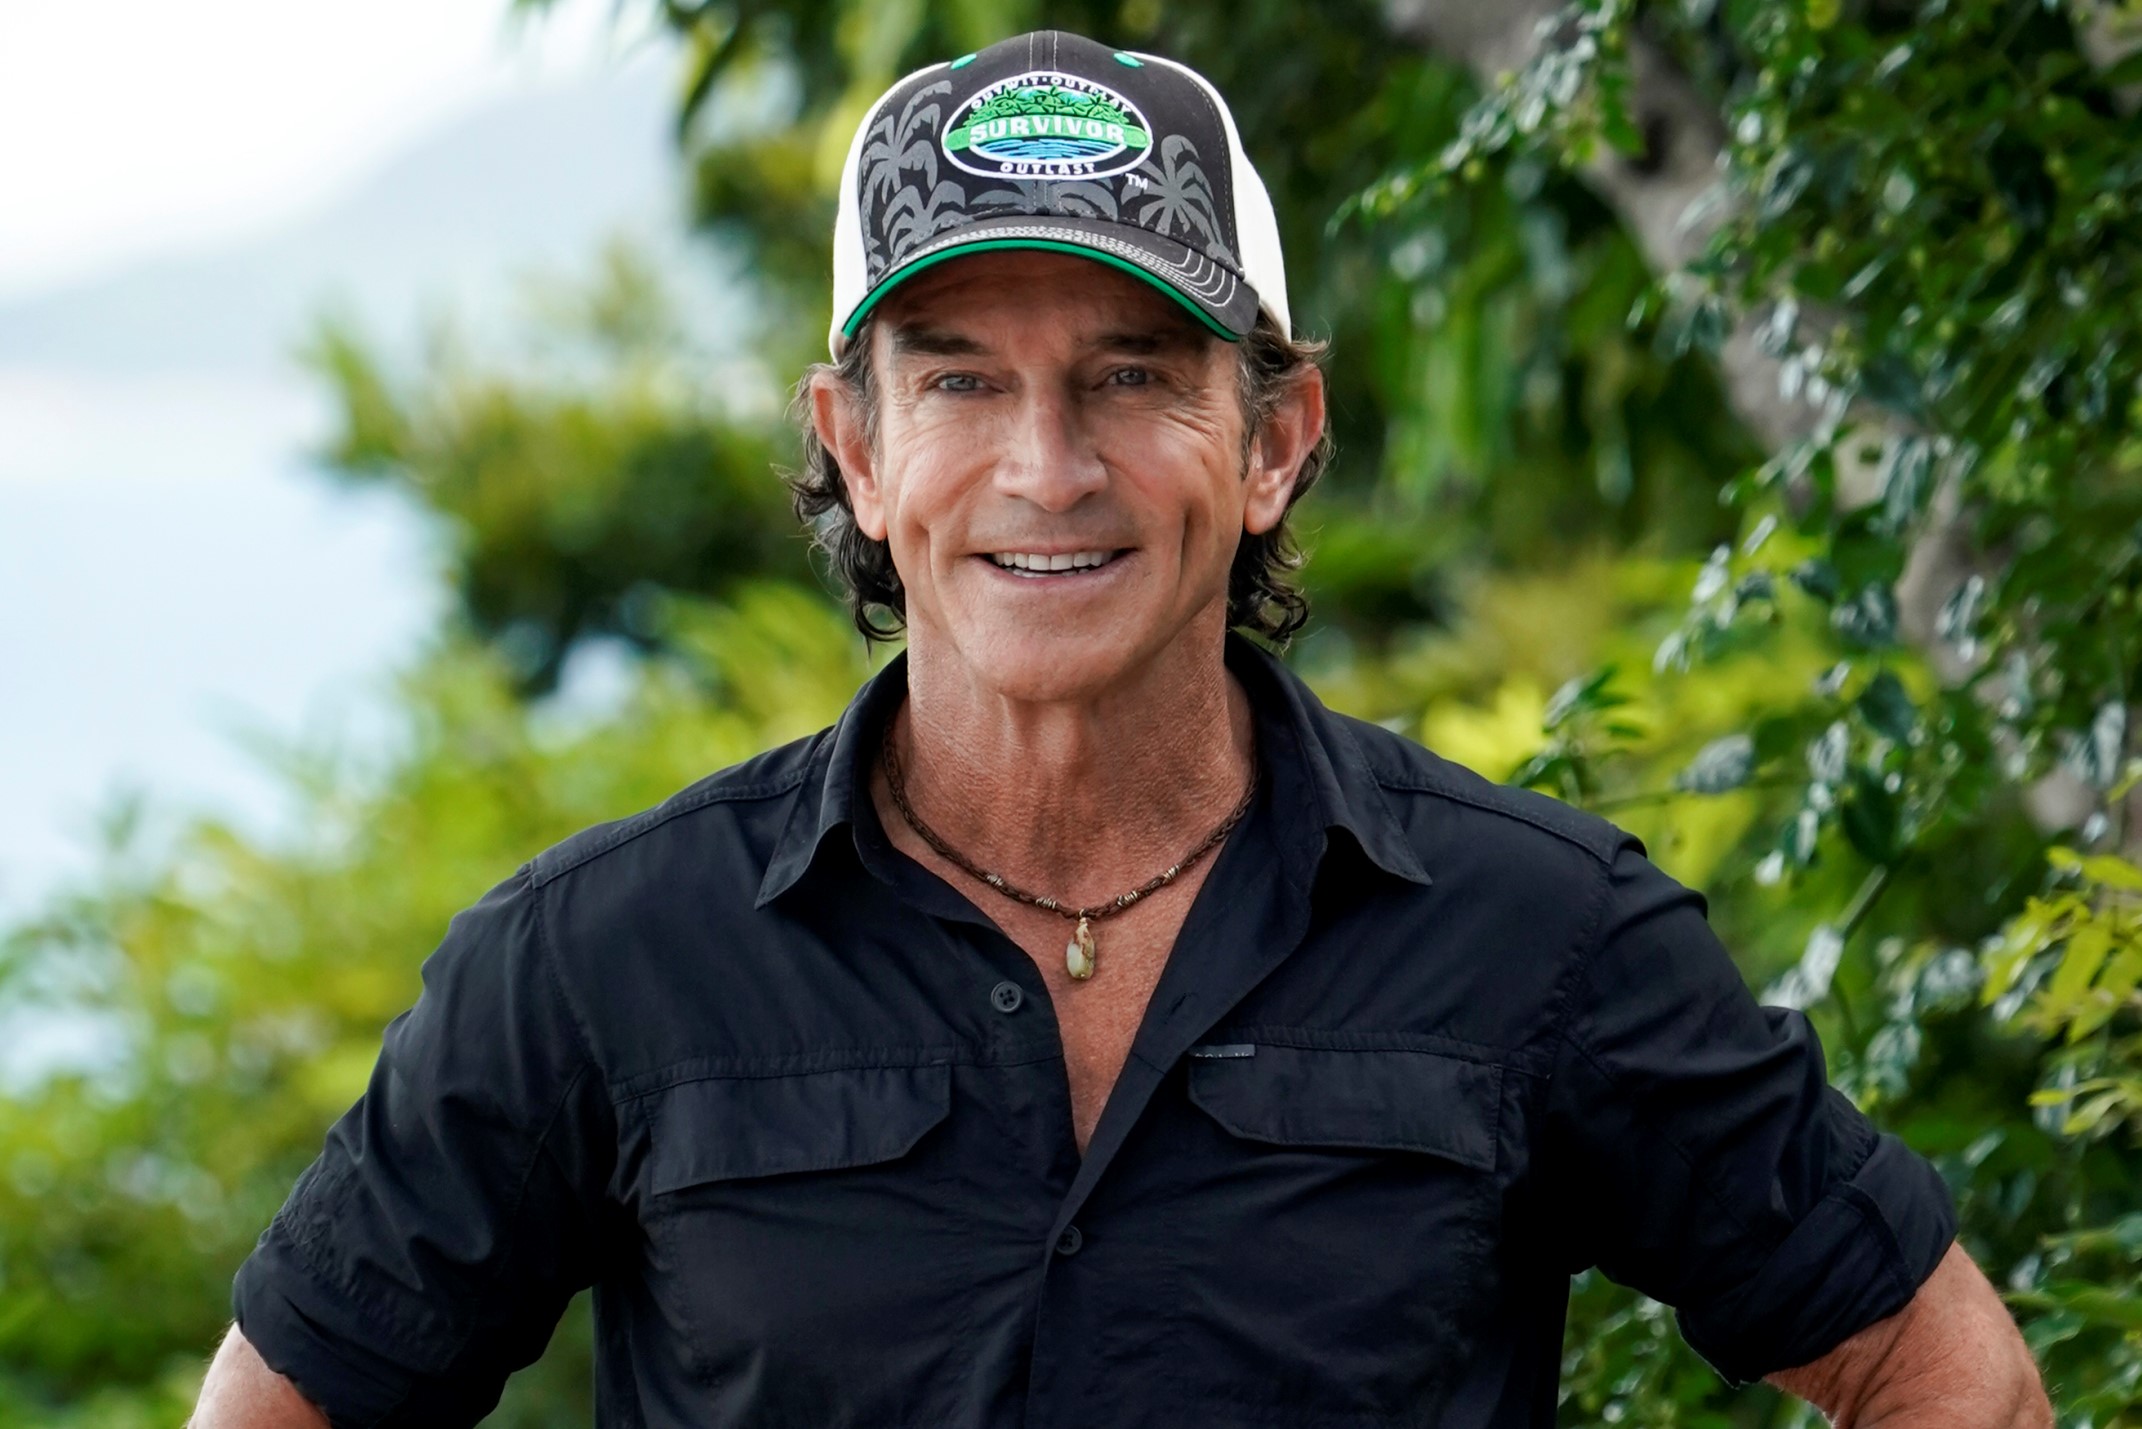 Jeff Probst, who announces the twists during 'Survivor' Season 42, wears a black button-up shirt and a black, white, and green 'Survivor' baseball cap.